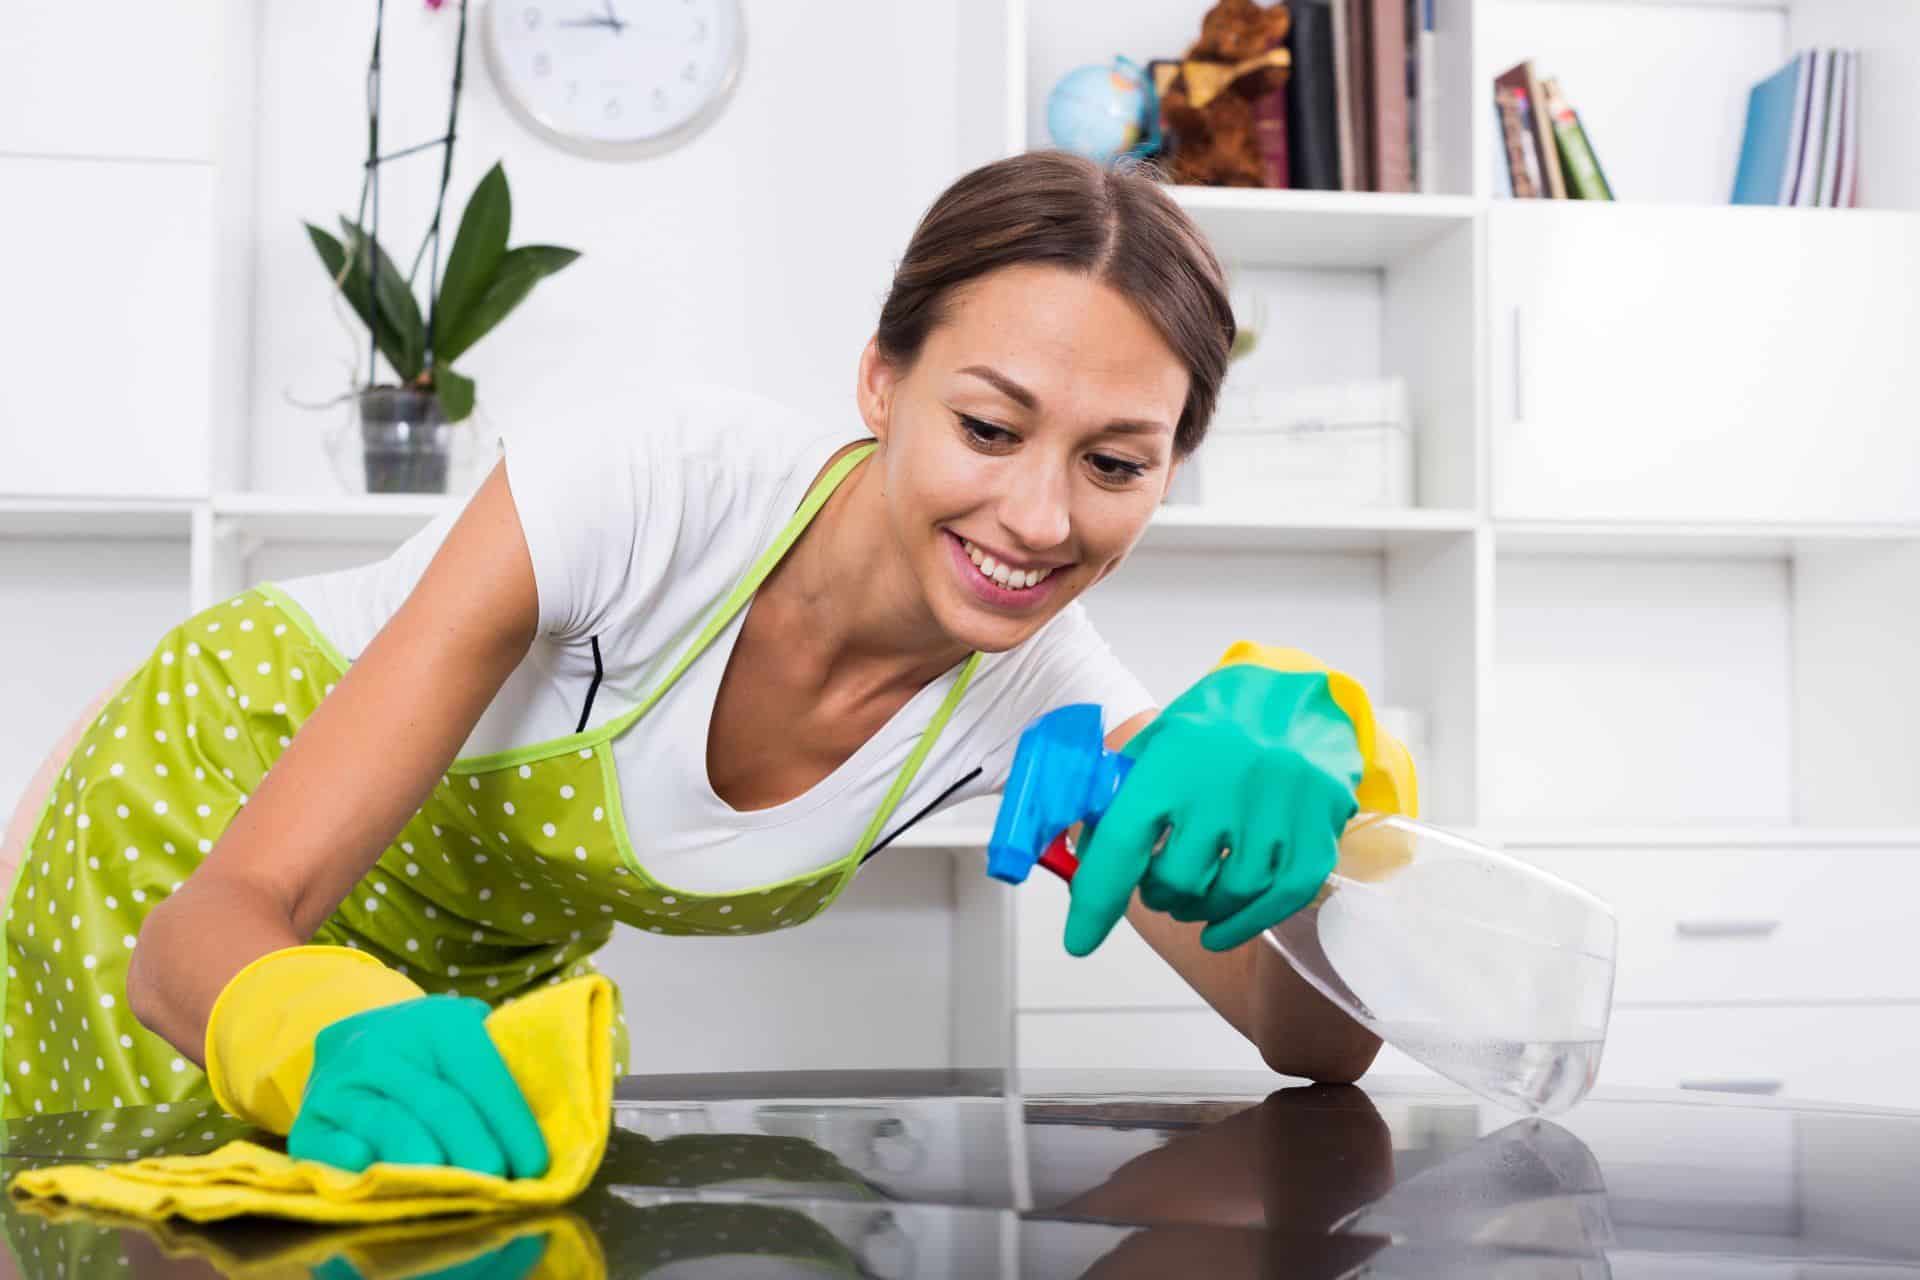 a woman in apron and rubber gloves cleaning a kitchen counter